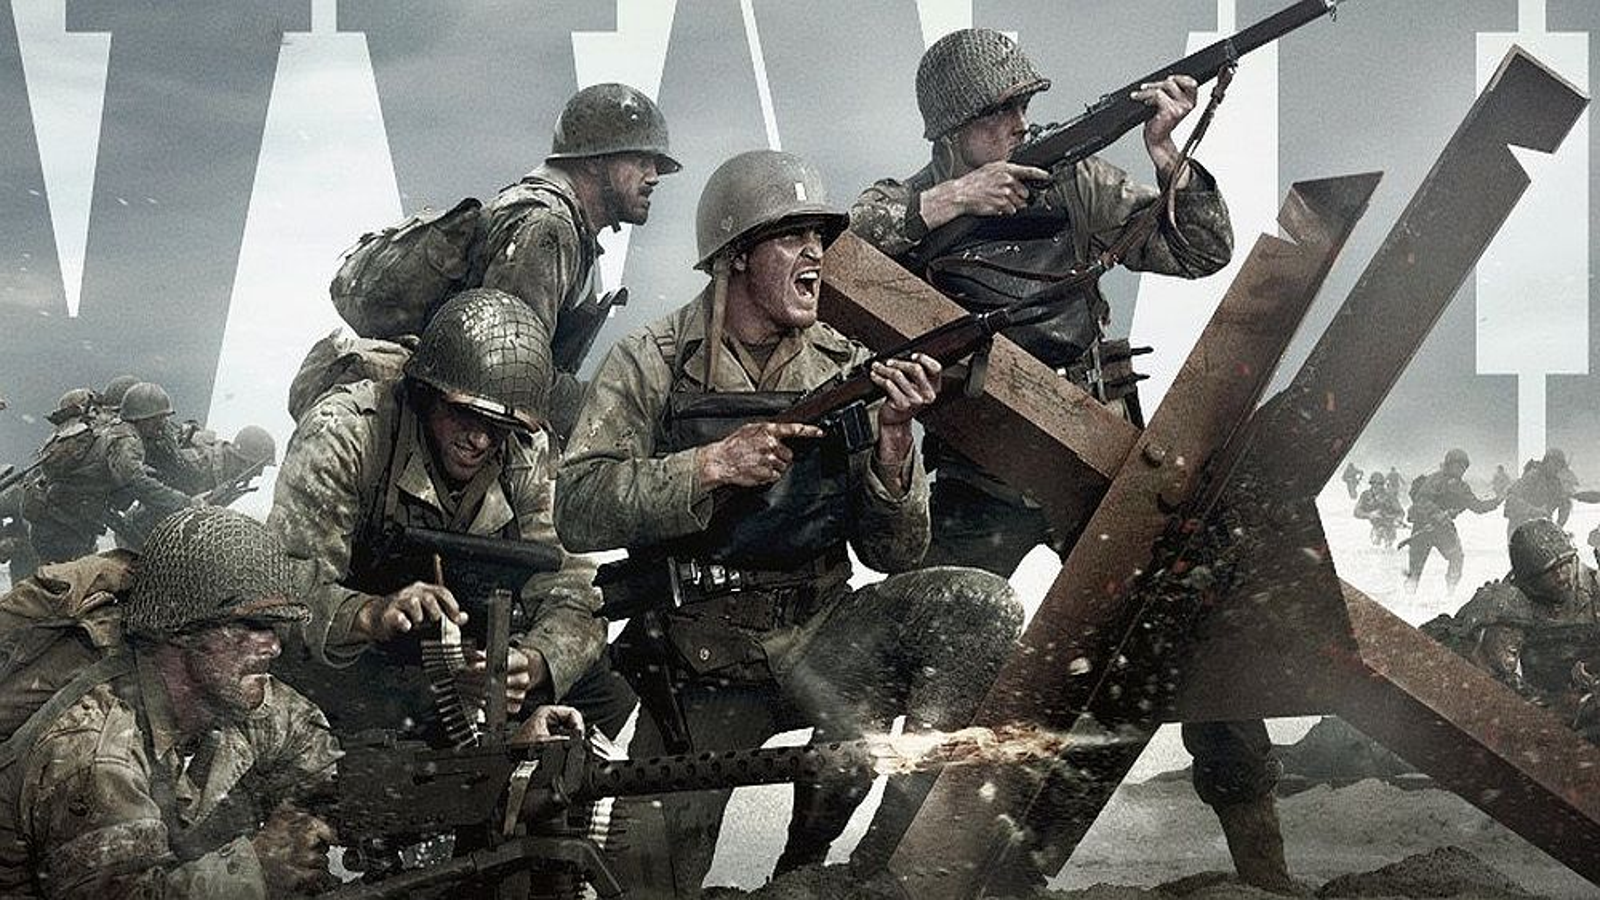 Review: 'Call Of Duty: WWII': The Good, The Bad, And The Overdone - Task &  Purpose